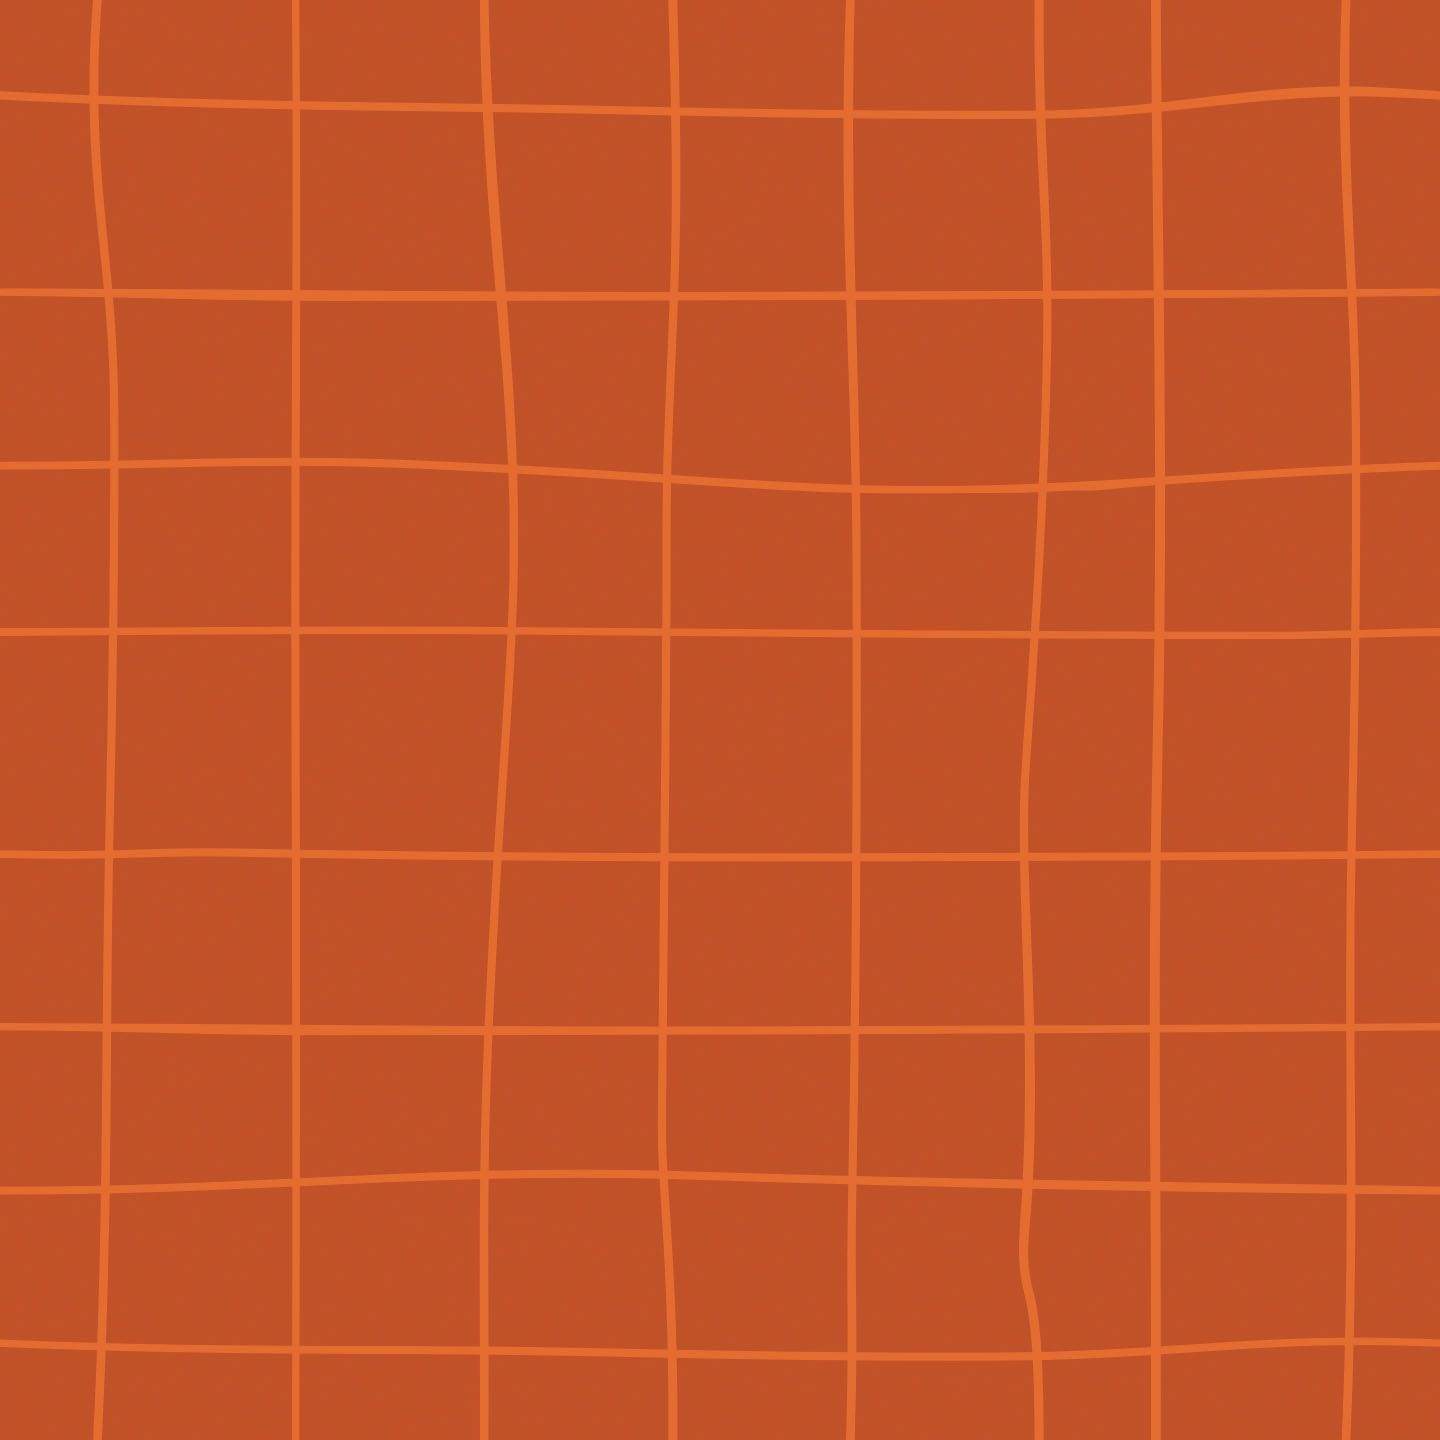 Simple Terracotta Grid Wallpaper And Stick Or Non Pasted